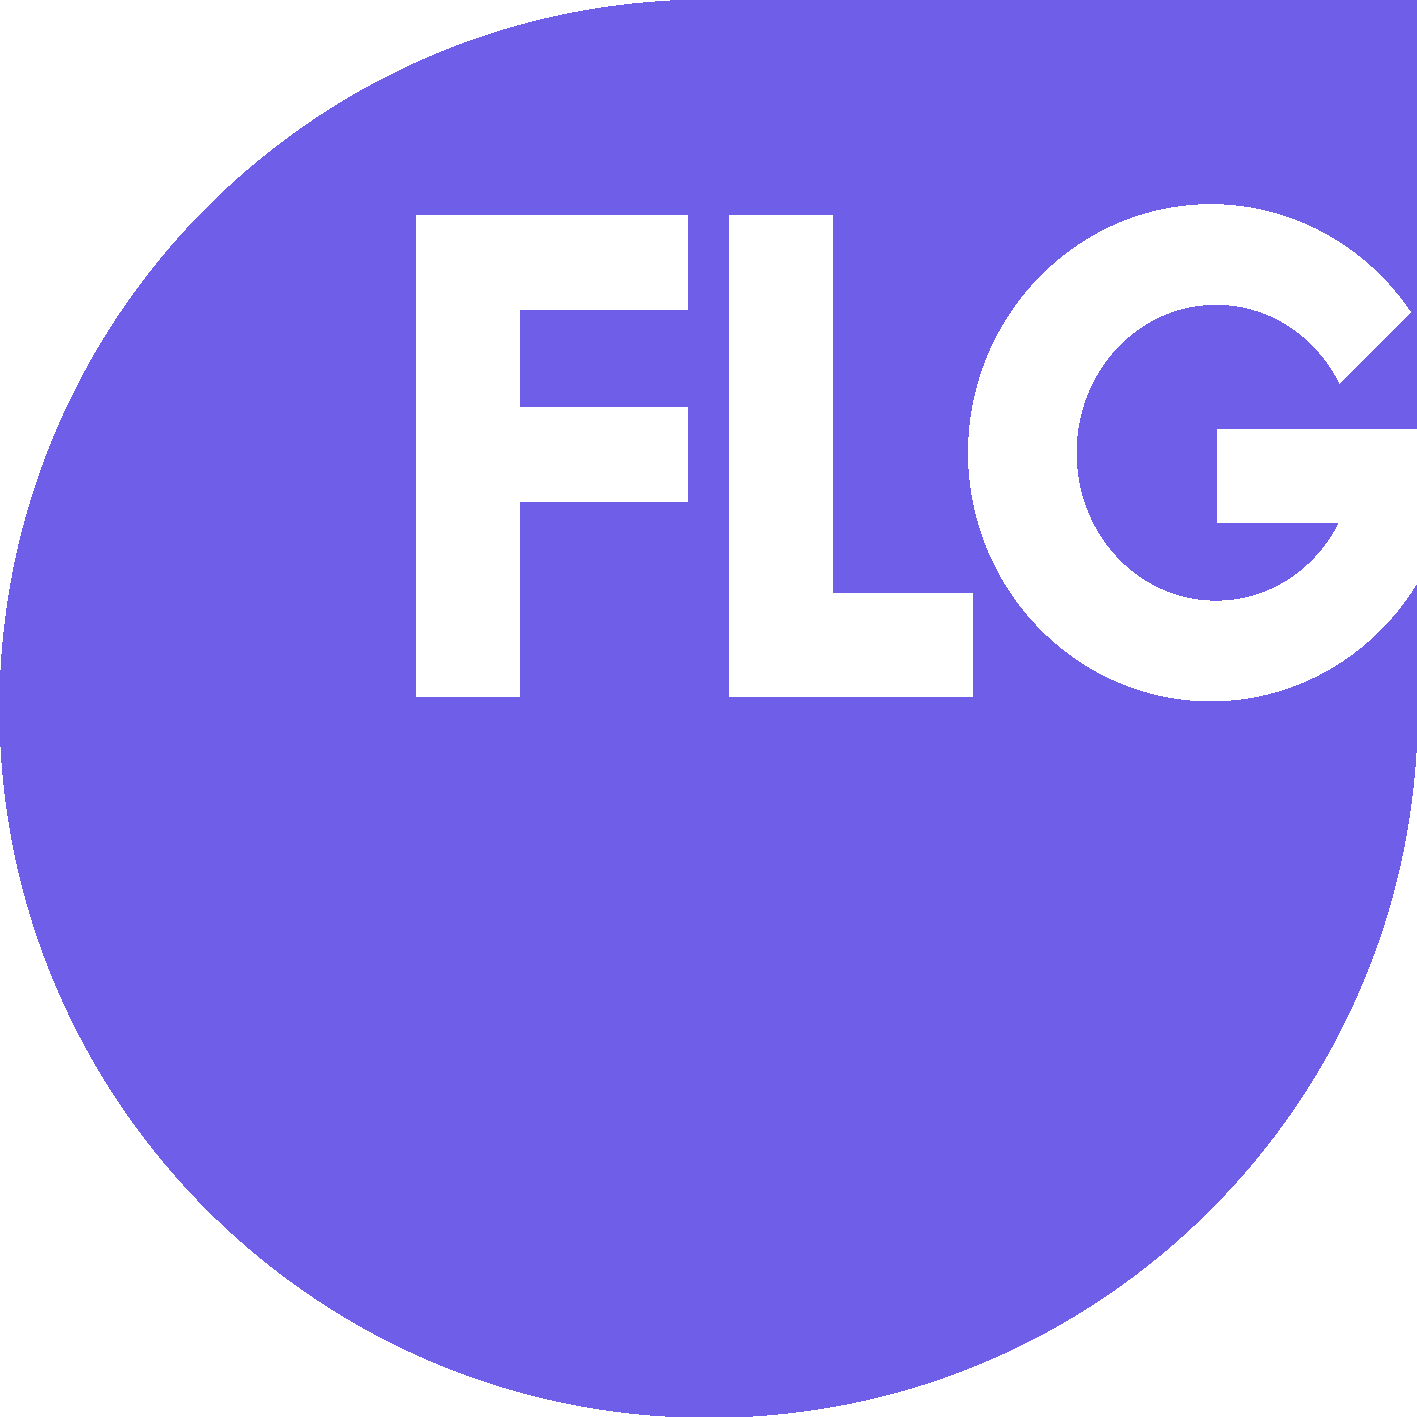 ClearCourse Business Services Limited (trading as FLG Business Technology) logo